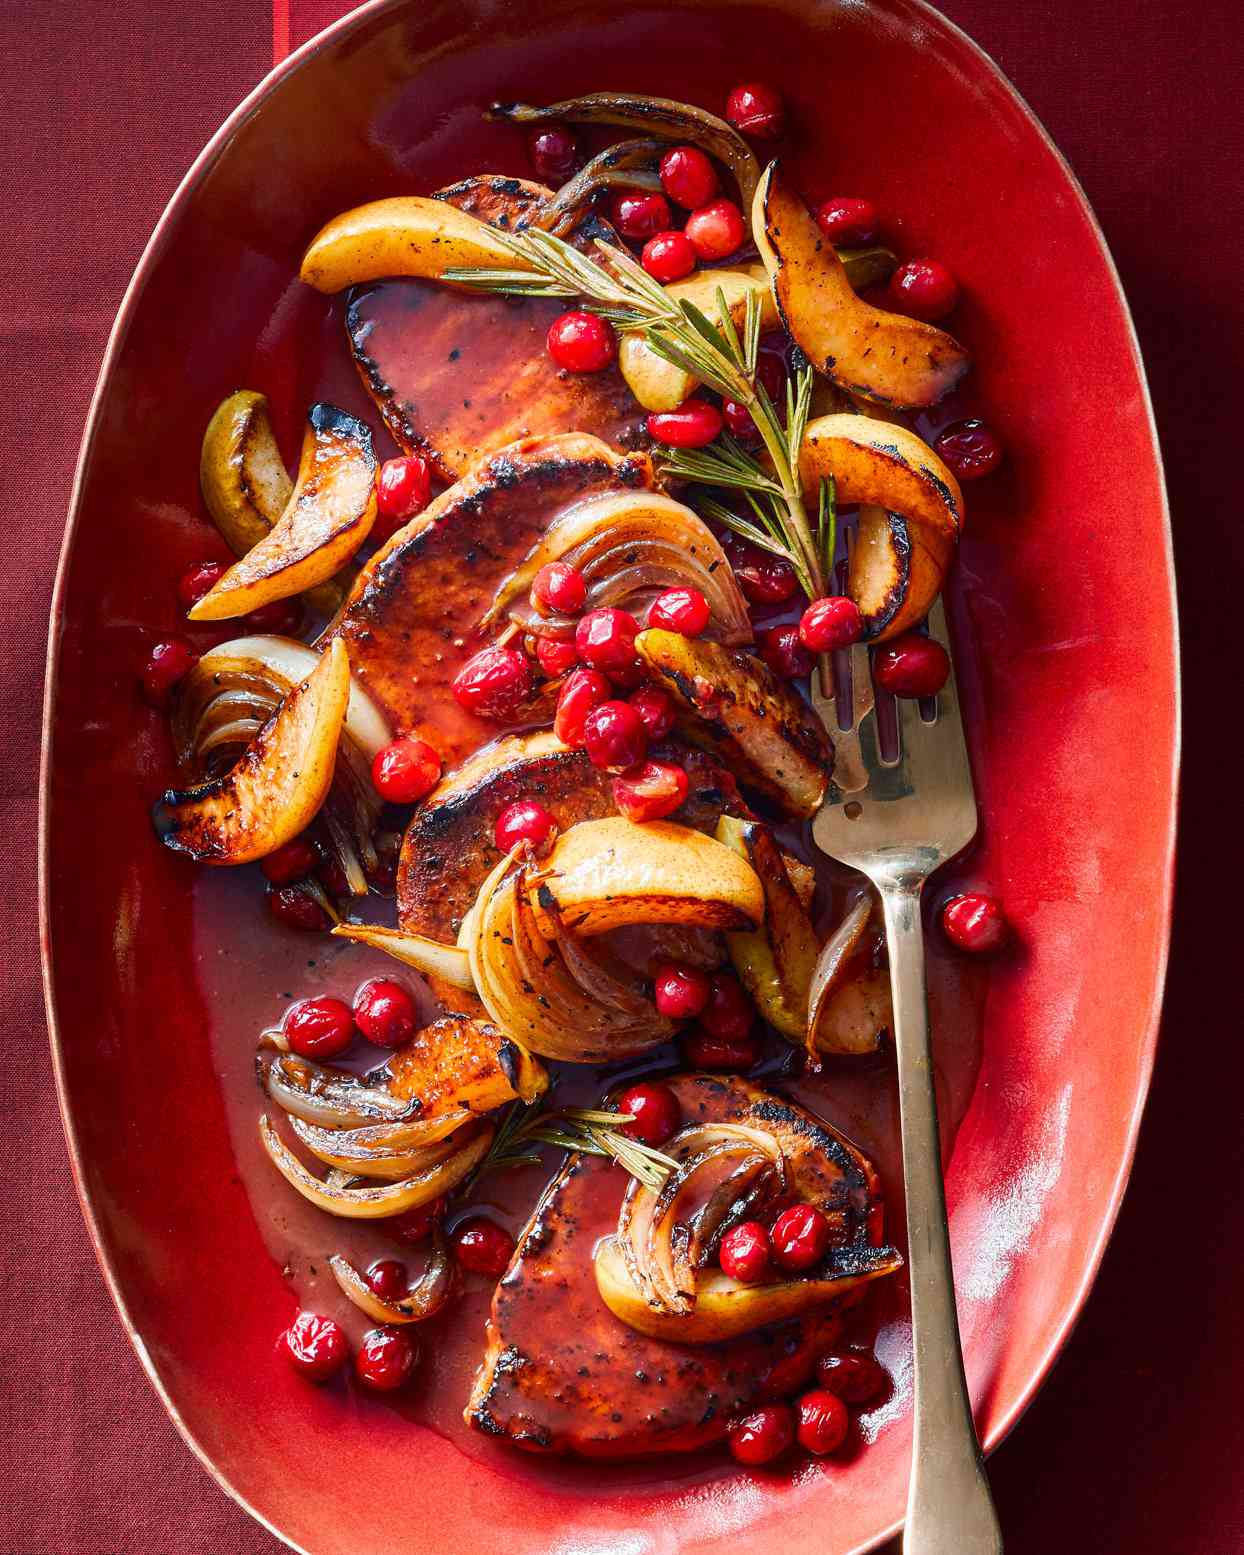 Pork Chops with Cranberries and Pears